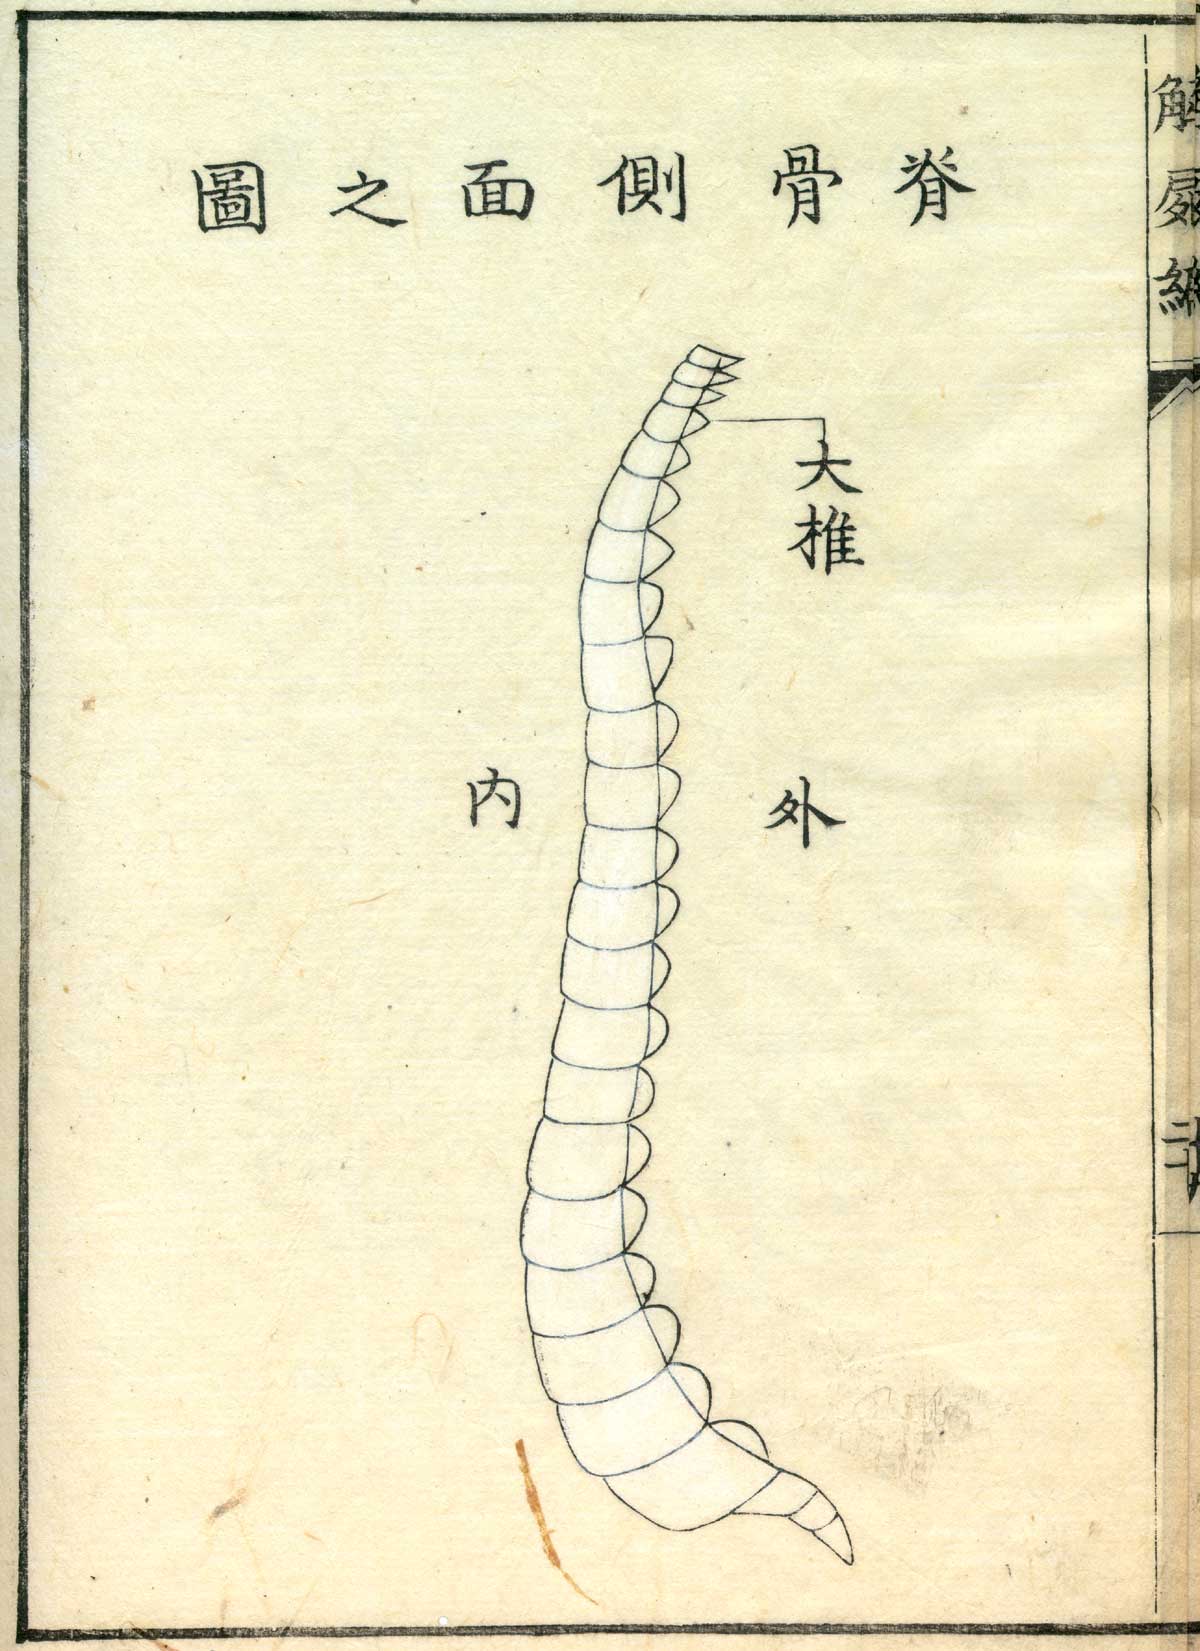 Hand colored woodcut of the bones of the vertebral column, with Japanese text above and below describing some of the structures, from Shinnin Kawaguchi's Kaishi hen, NLM Call no.: WZ 260 K21k 1772.